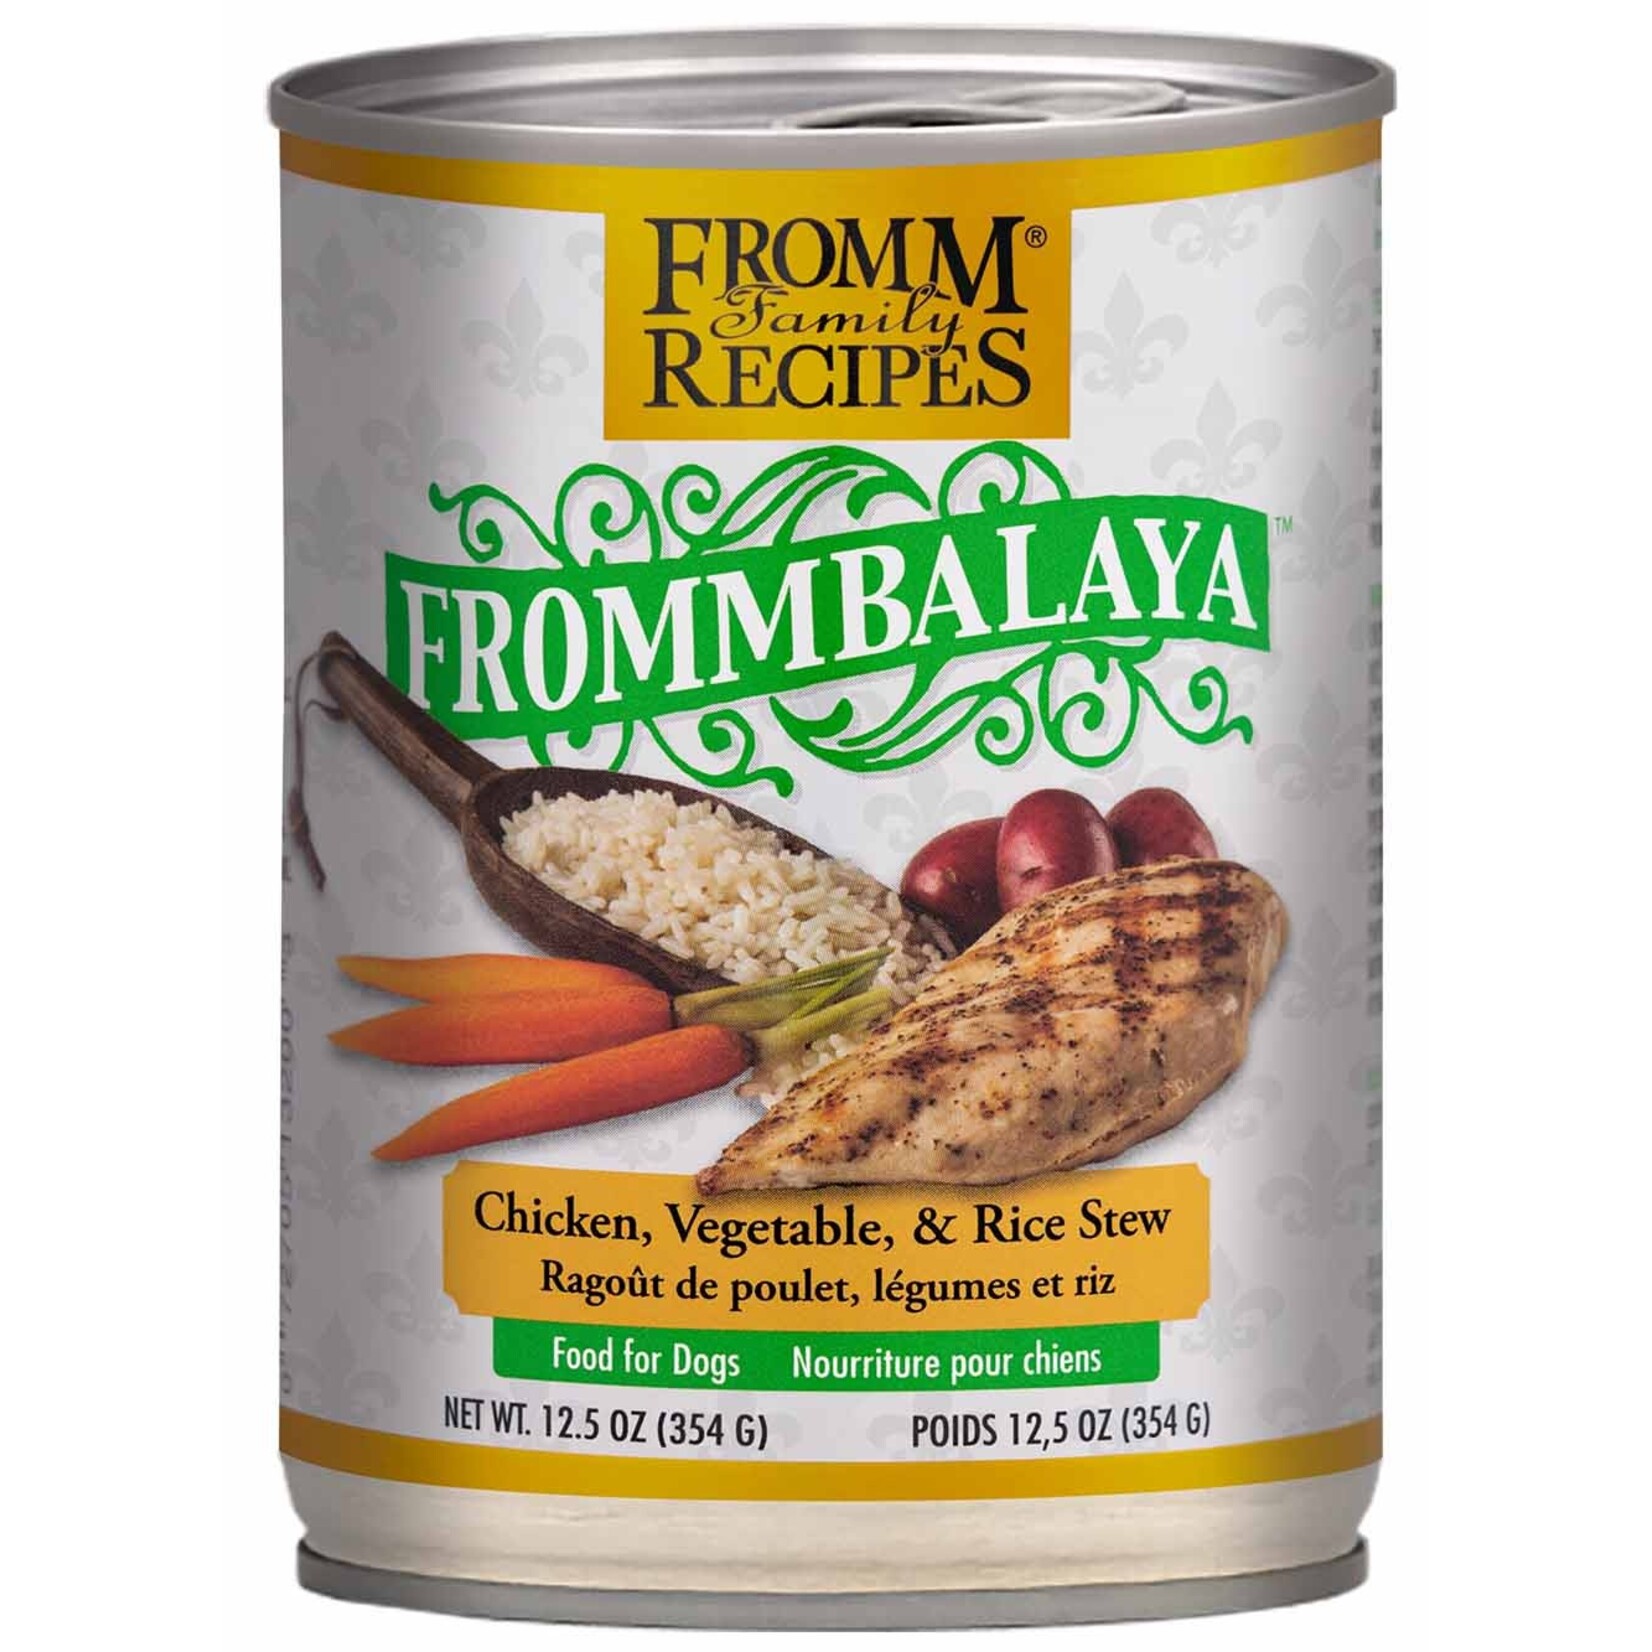 Fromm Frommbalaya Chicken, Vegetable, and Rice Stew Wet Dog Food, 12.5oz Can